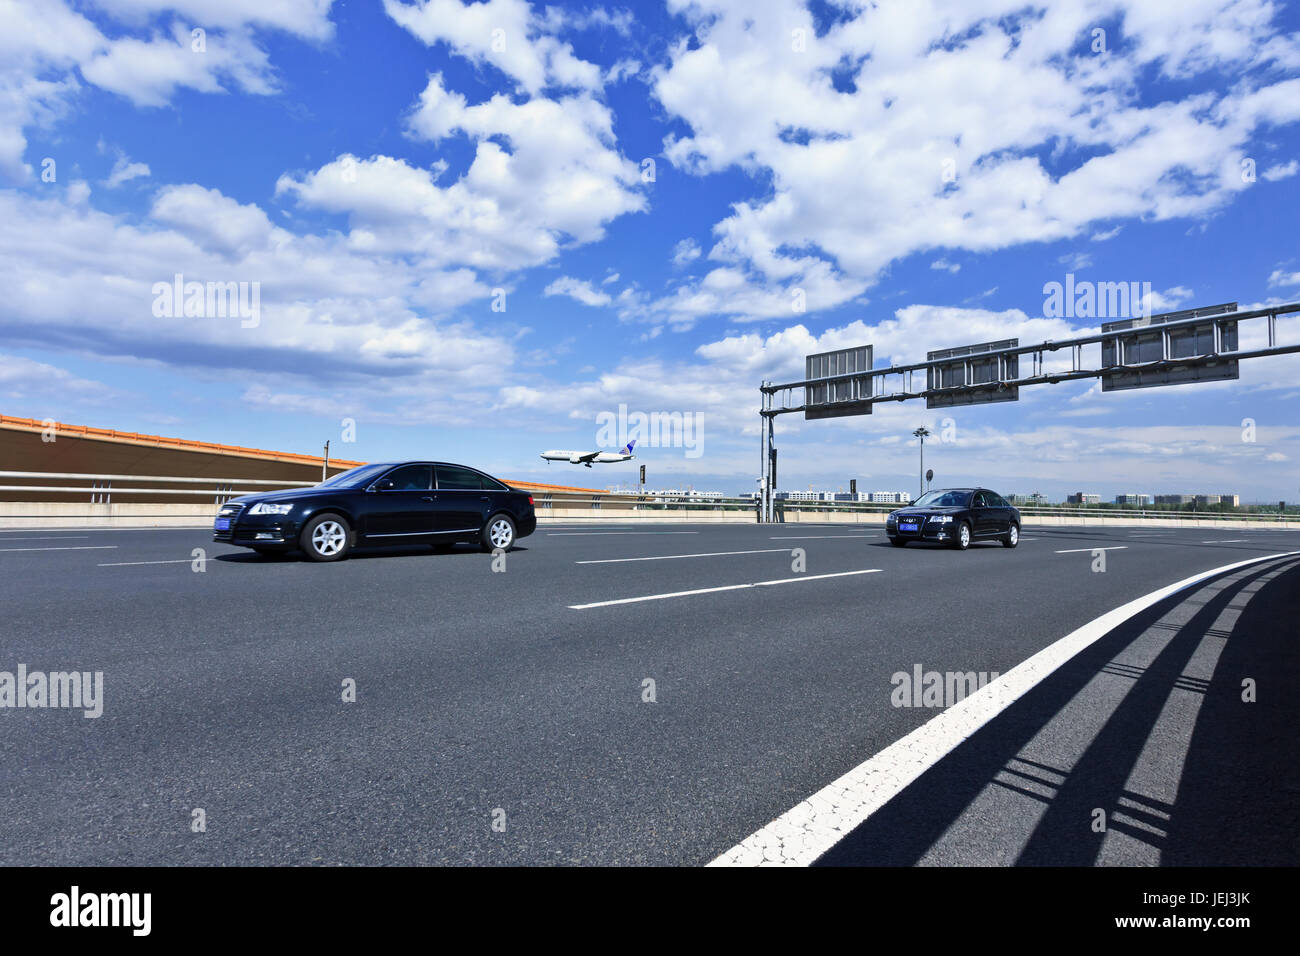 BEIJING-SEPT. 3, 2012. Expressway Beijing Capital Internationa Airport. China gave green light to 60 infrastructure projects worth over $150 billion. Stock Photo